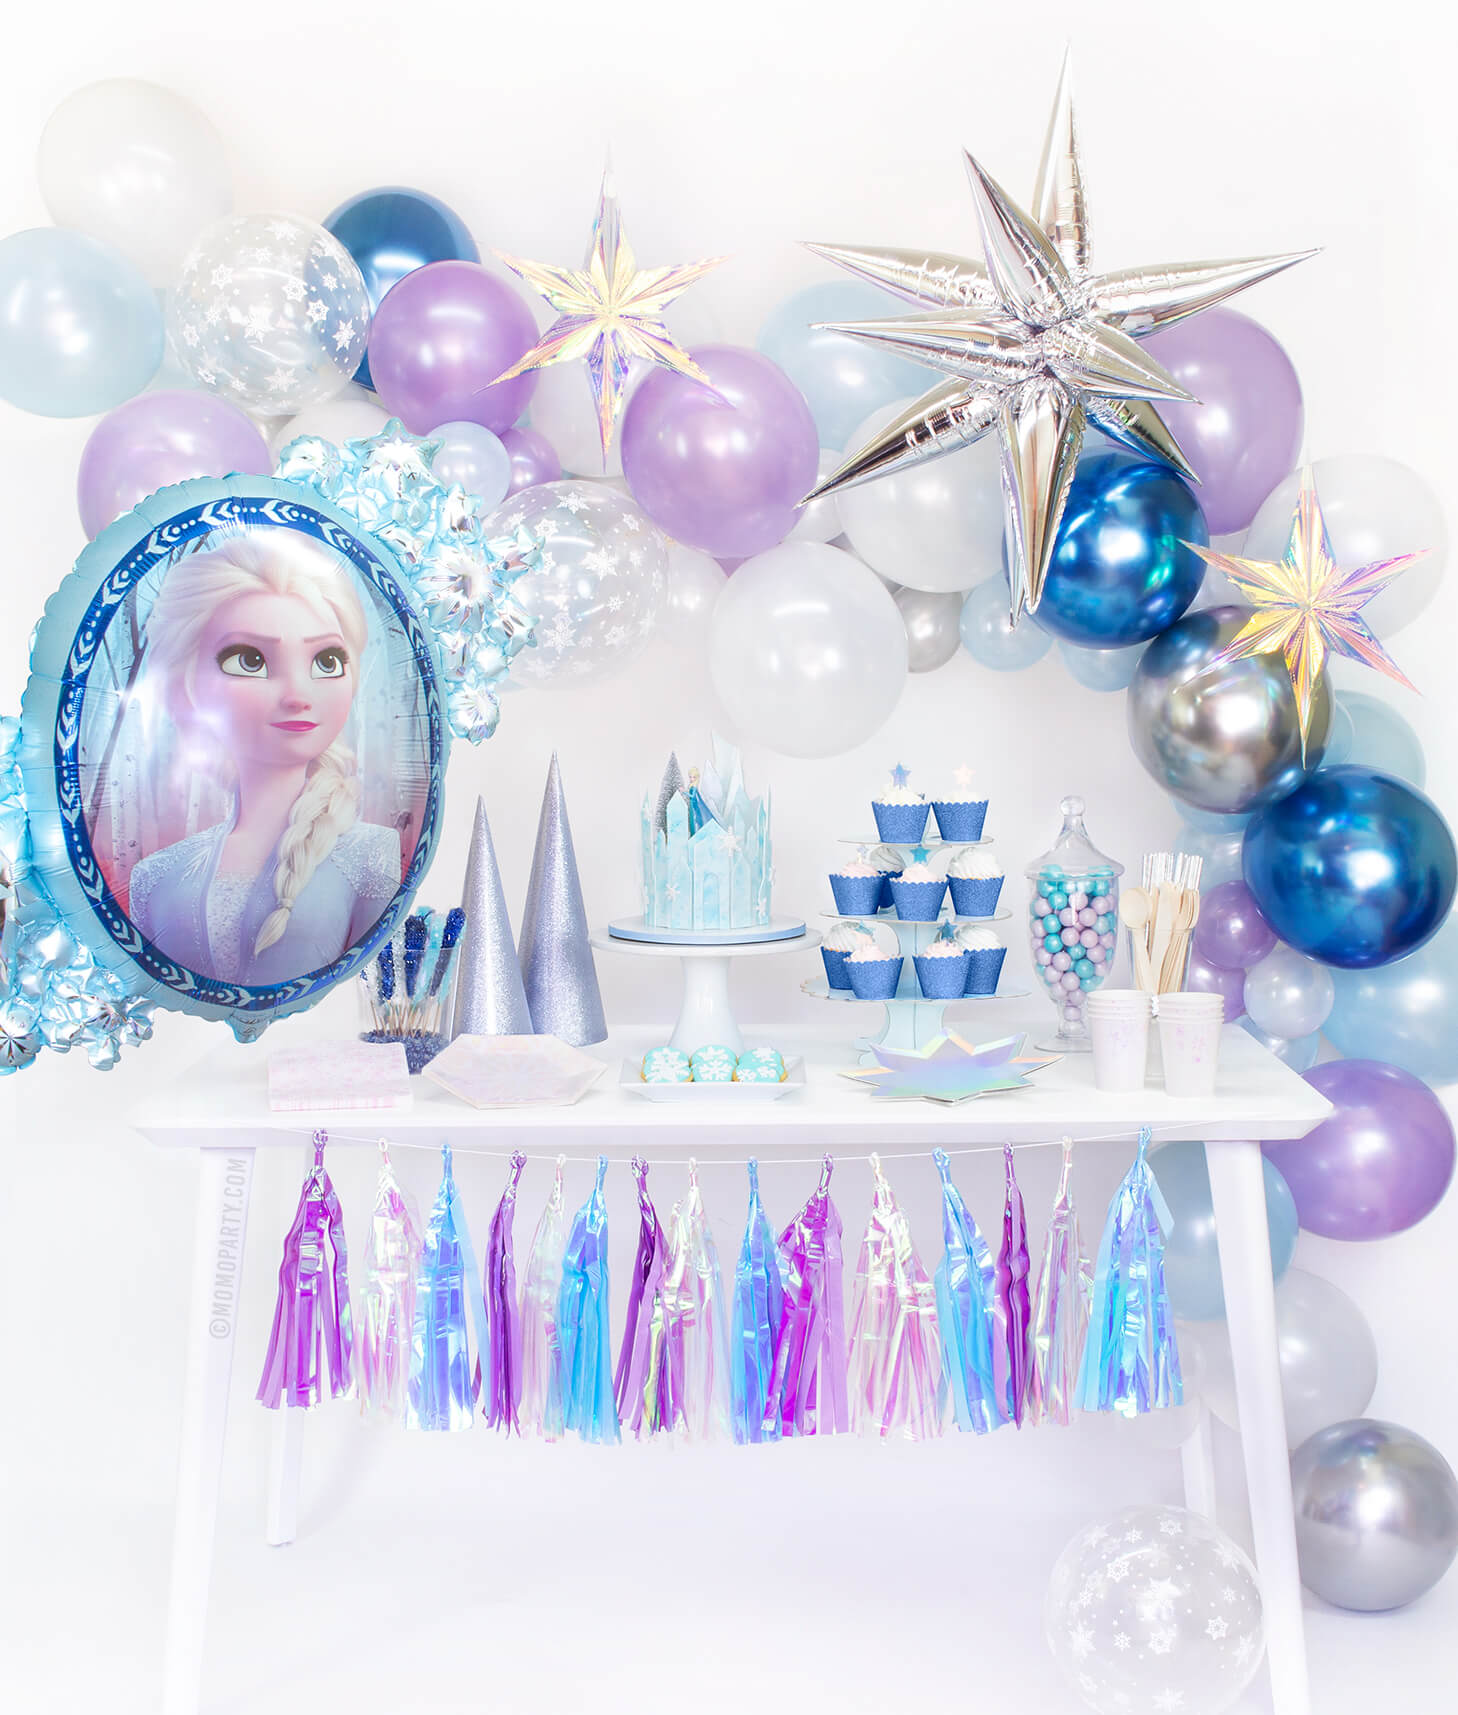 Momo Party Frozen Box, set up inspiration look with Frozen Balloon garland, with Jumbo 12 Point Silver Starburst Foil Balloon, Iridescent Star Decorations and  Disney Frozen 2 Elsa Anna Two Sided Foil Balloon as party backdrop wall decorations. Desert table with Meri Meri Shining Star Large Plates, Day Dream Society Frosted Small Plates, Iridescent Cups, Frosted Napkins, frozen cake with a elsa figure toy, for a modern Frozen party, Frozen 2 party, Girls Frozen birthday, frozen winter wonderland party